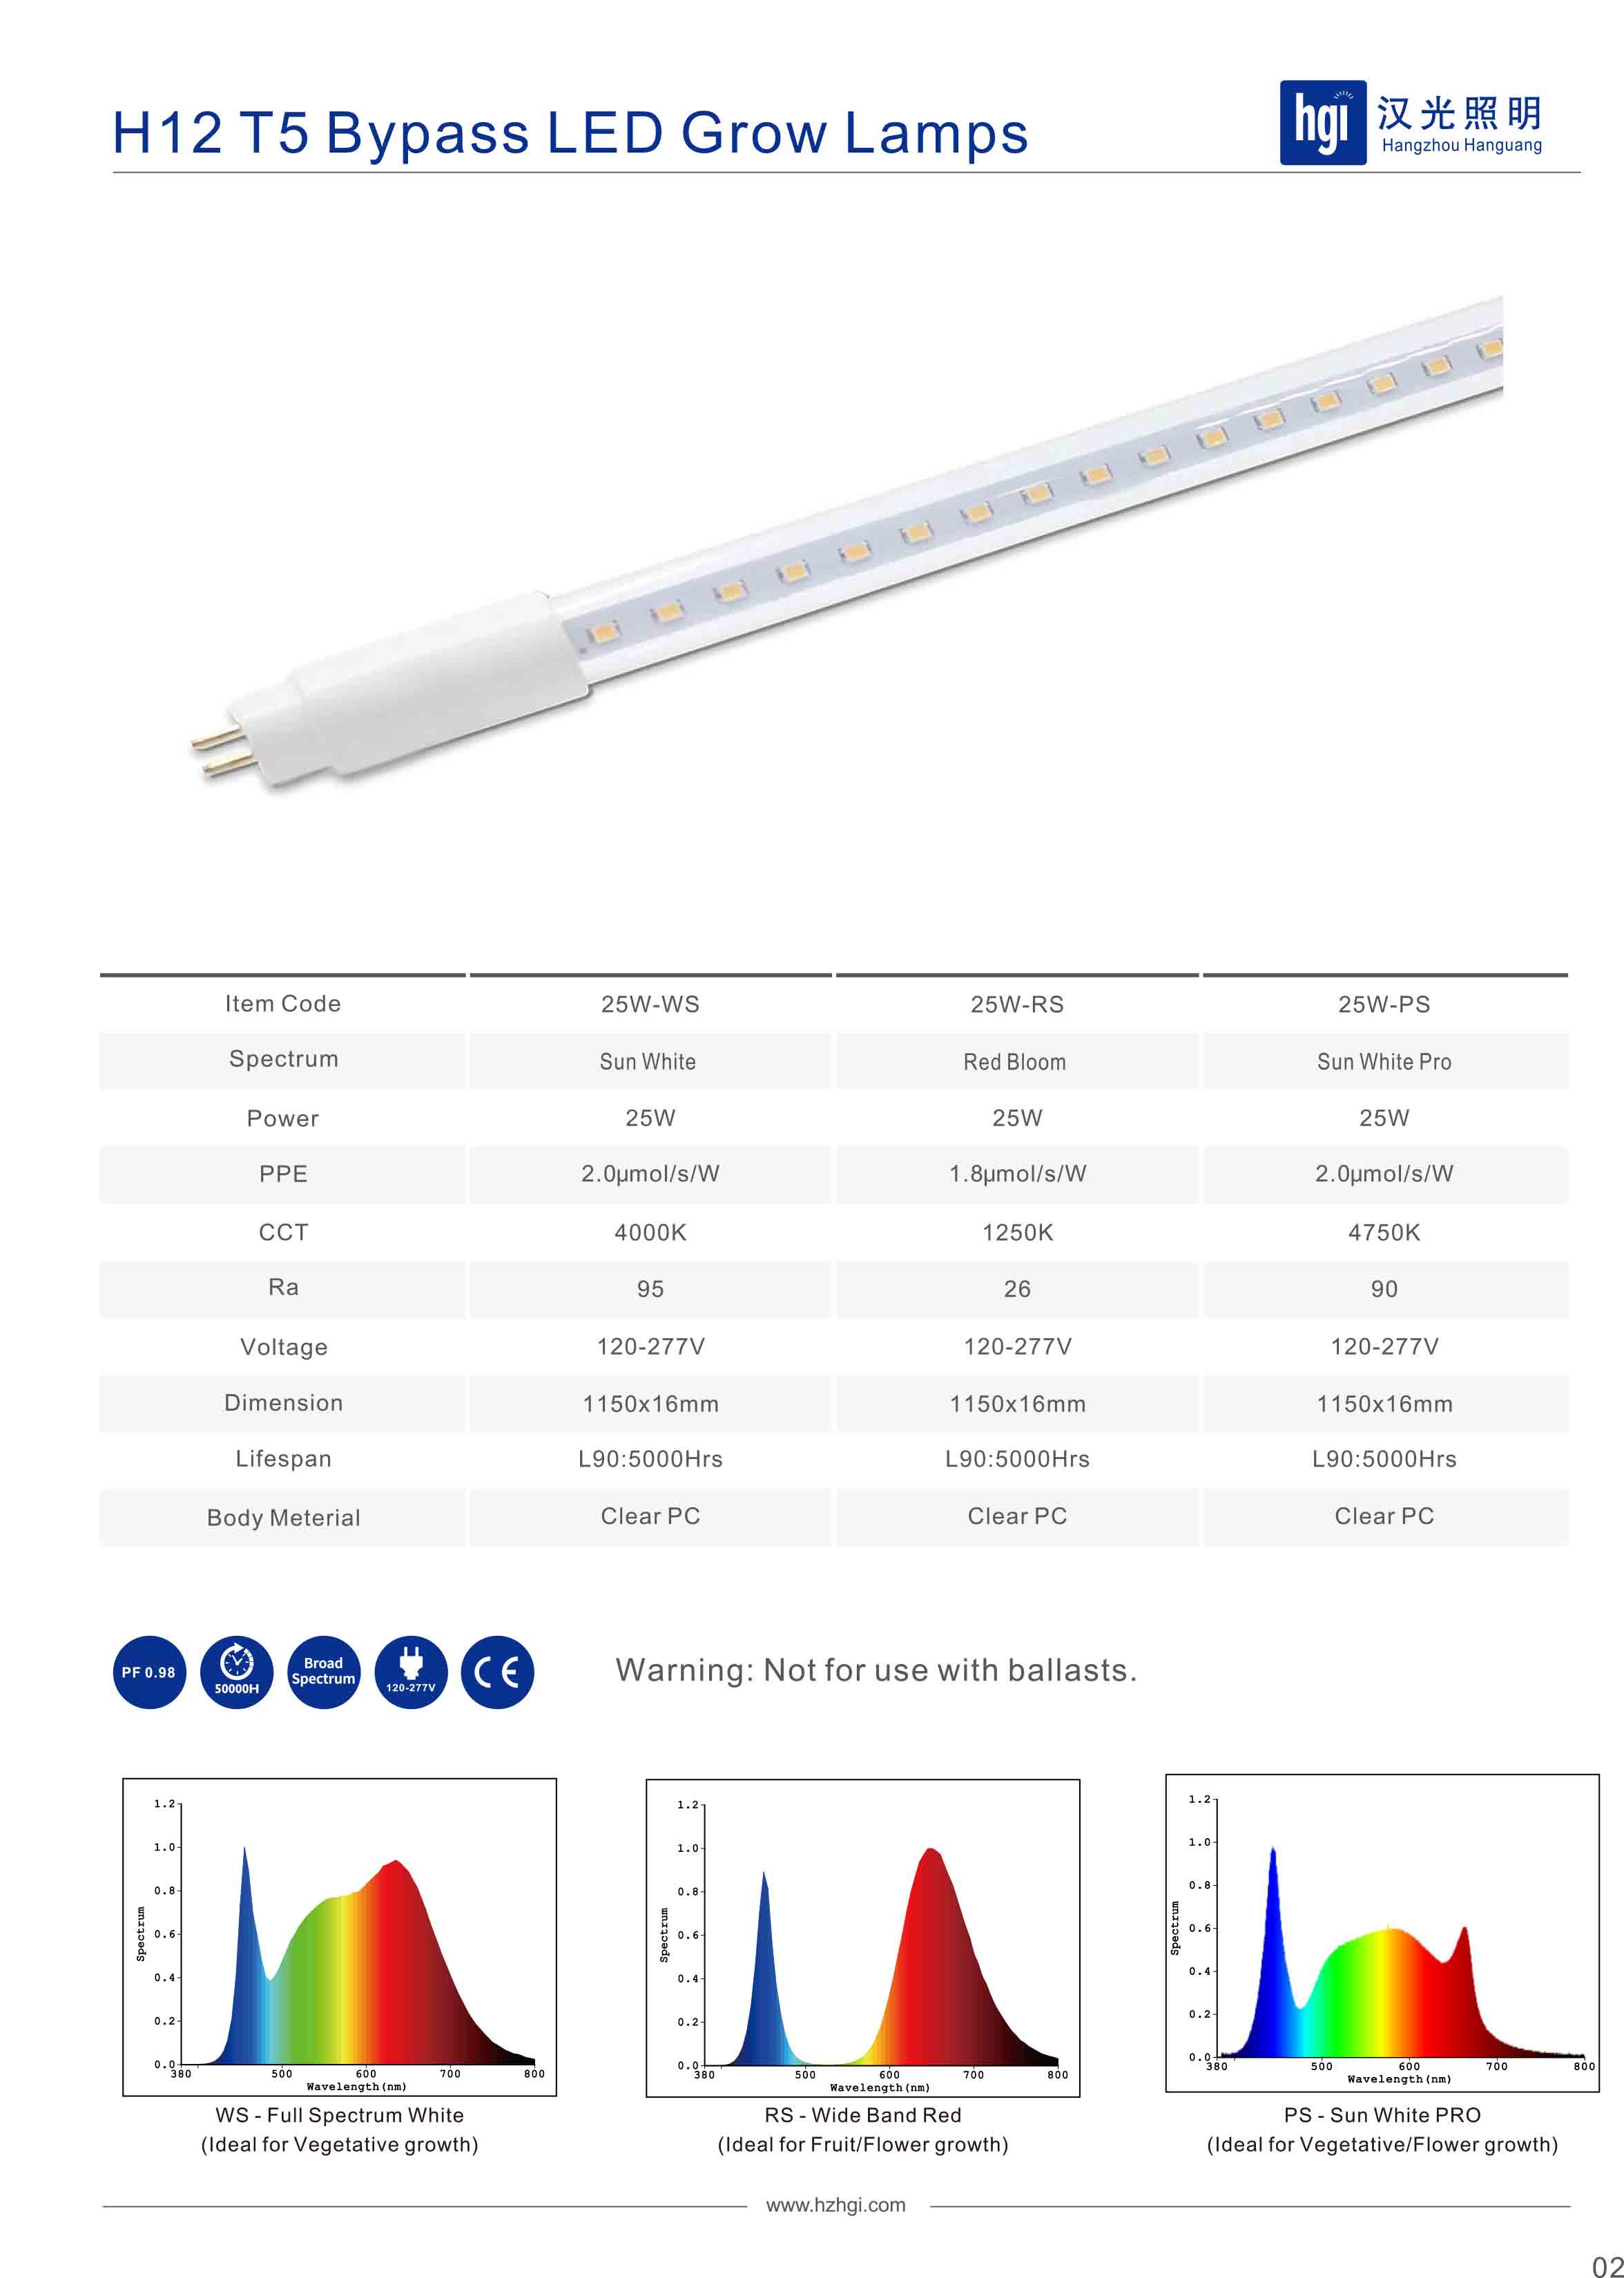 H12 T5 Bypass LED Grow Lamps